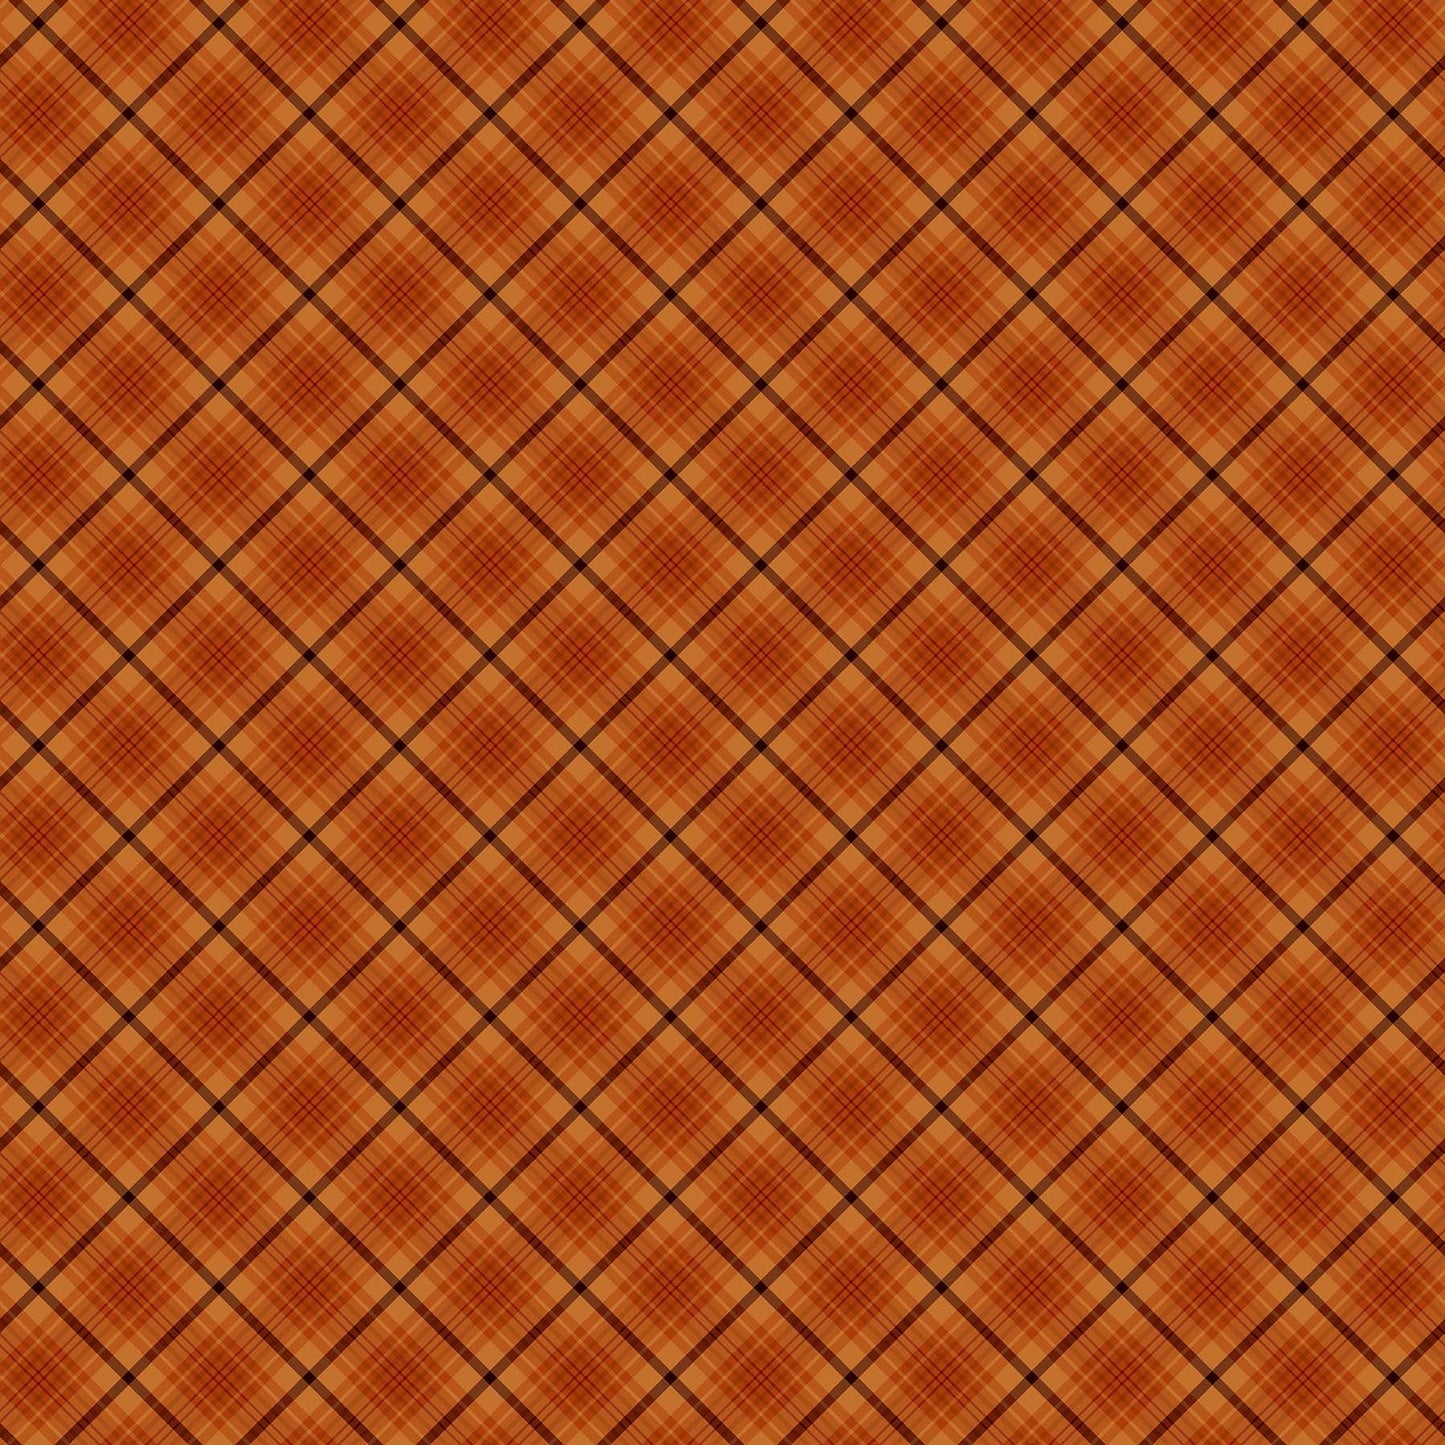 Northcott Fabric by the Yard FQ (18" x 21") Bias Plaid from Sunshine Harvest Collection 25460-58